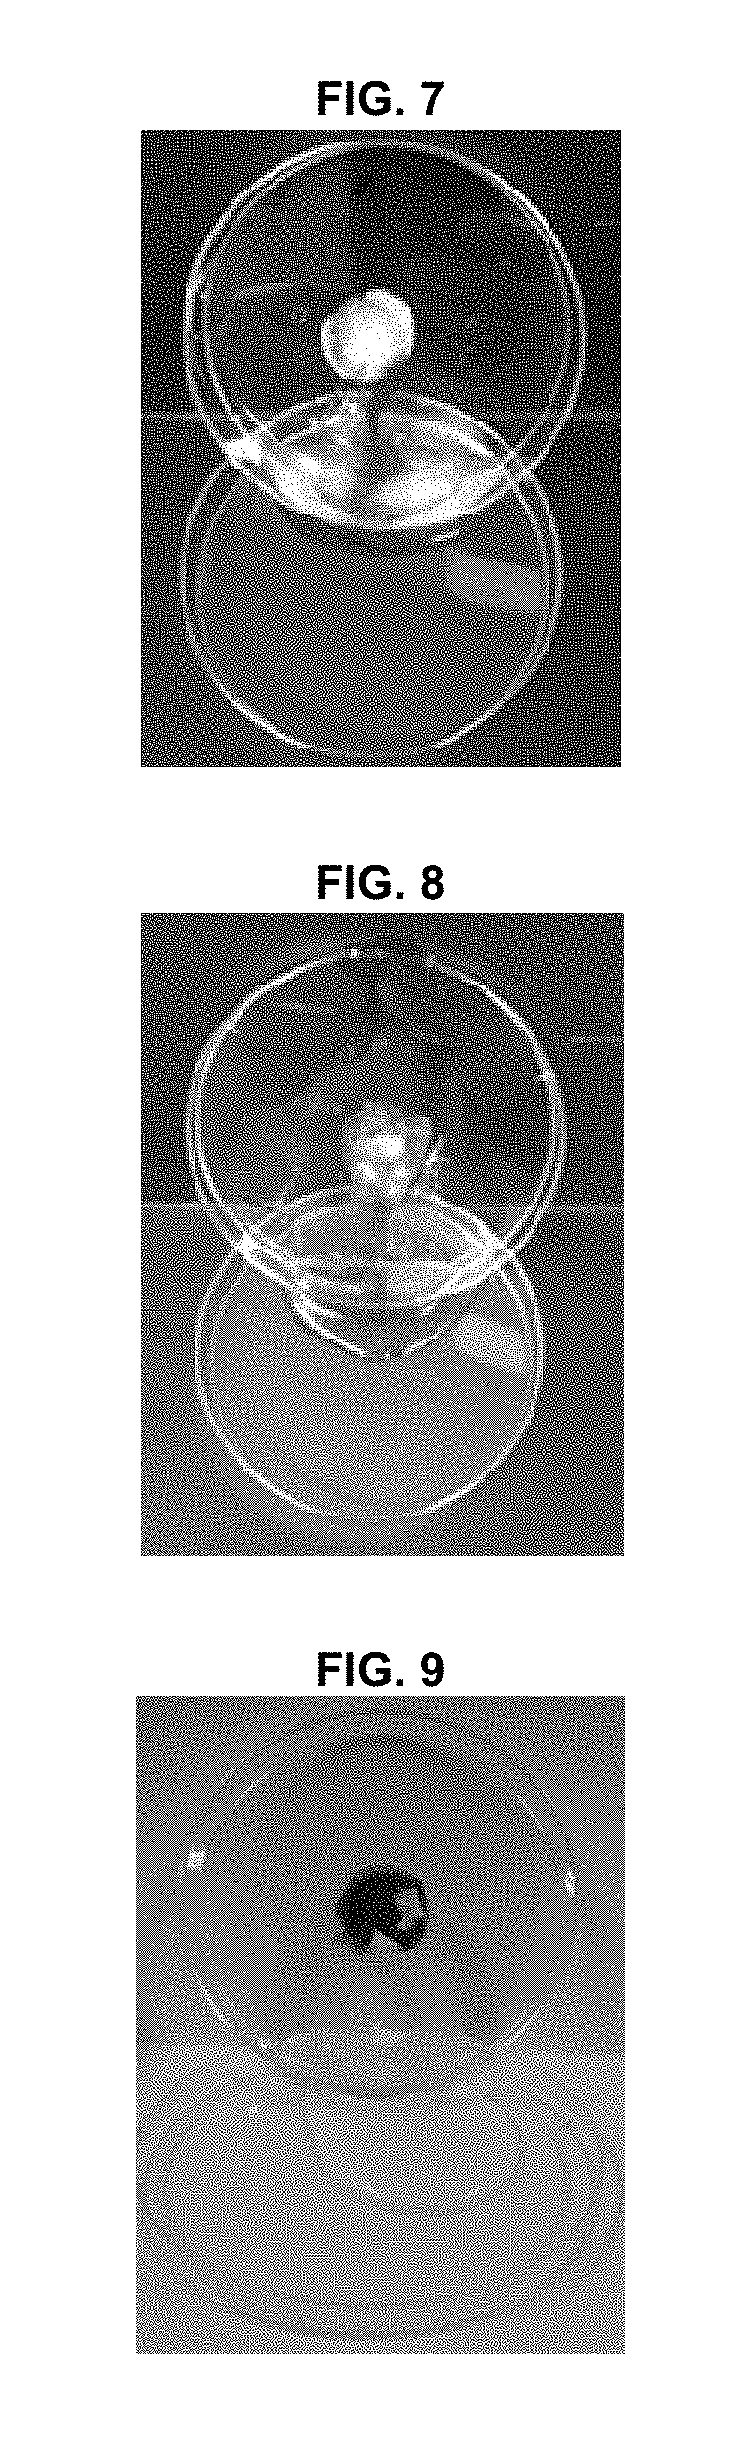 Pharmaceutical composition for protecting wounds, providing hemostasis, or preventing adhesion in the gastrointestinal tract